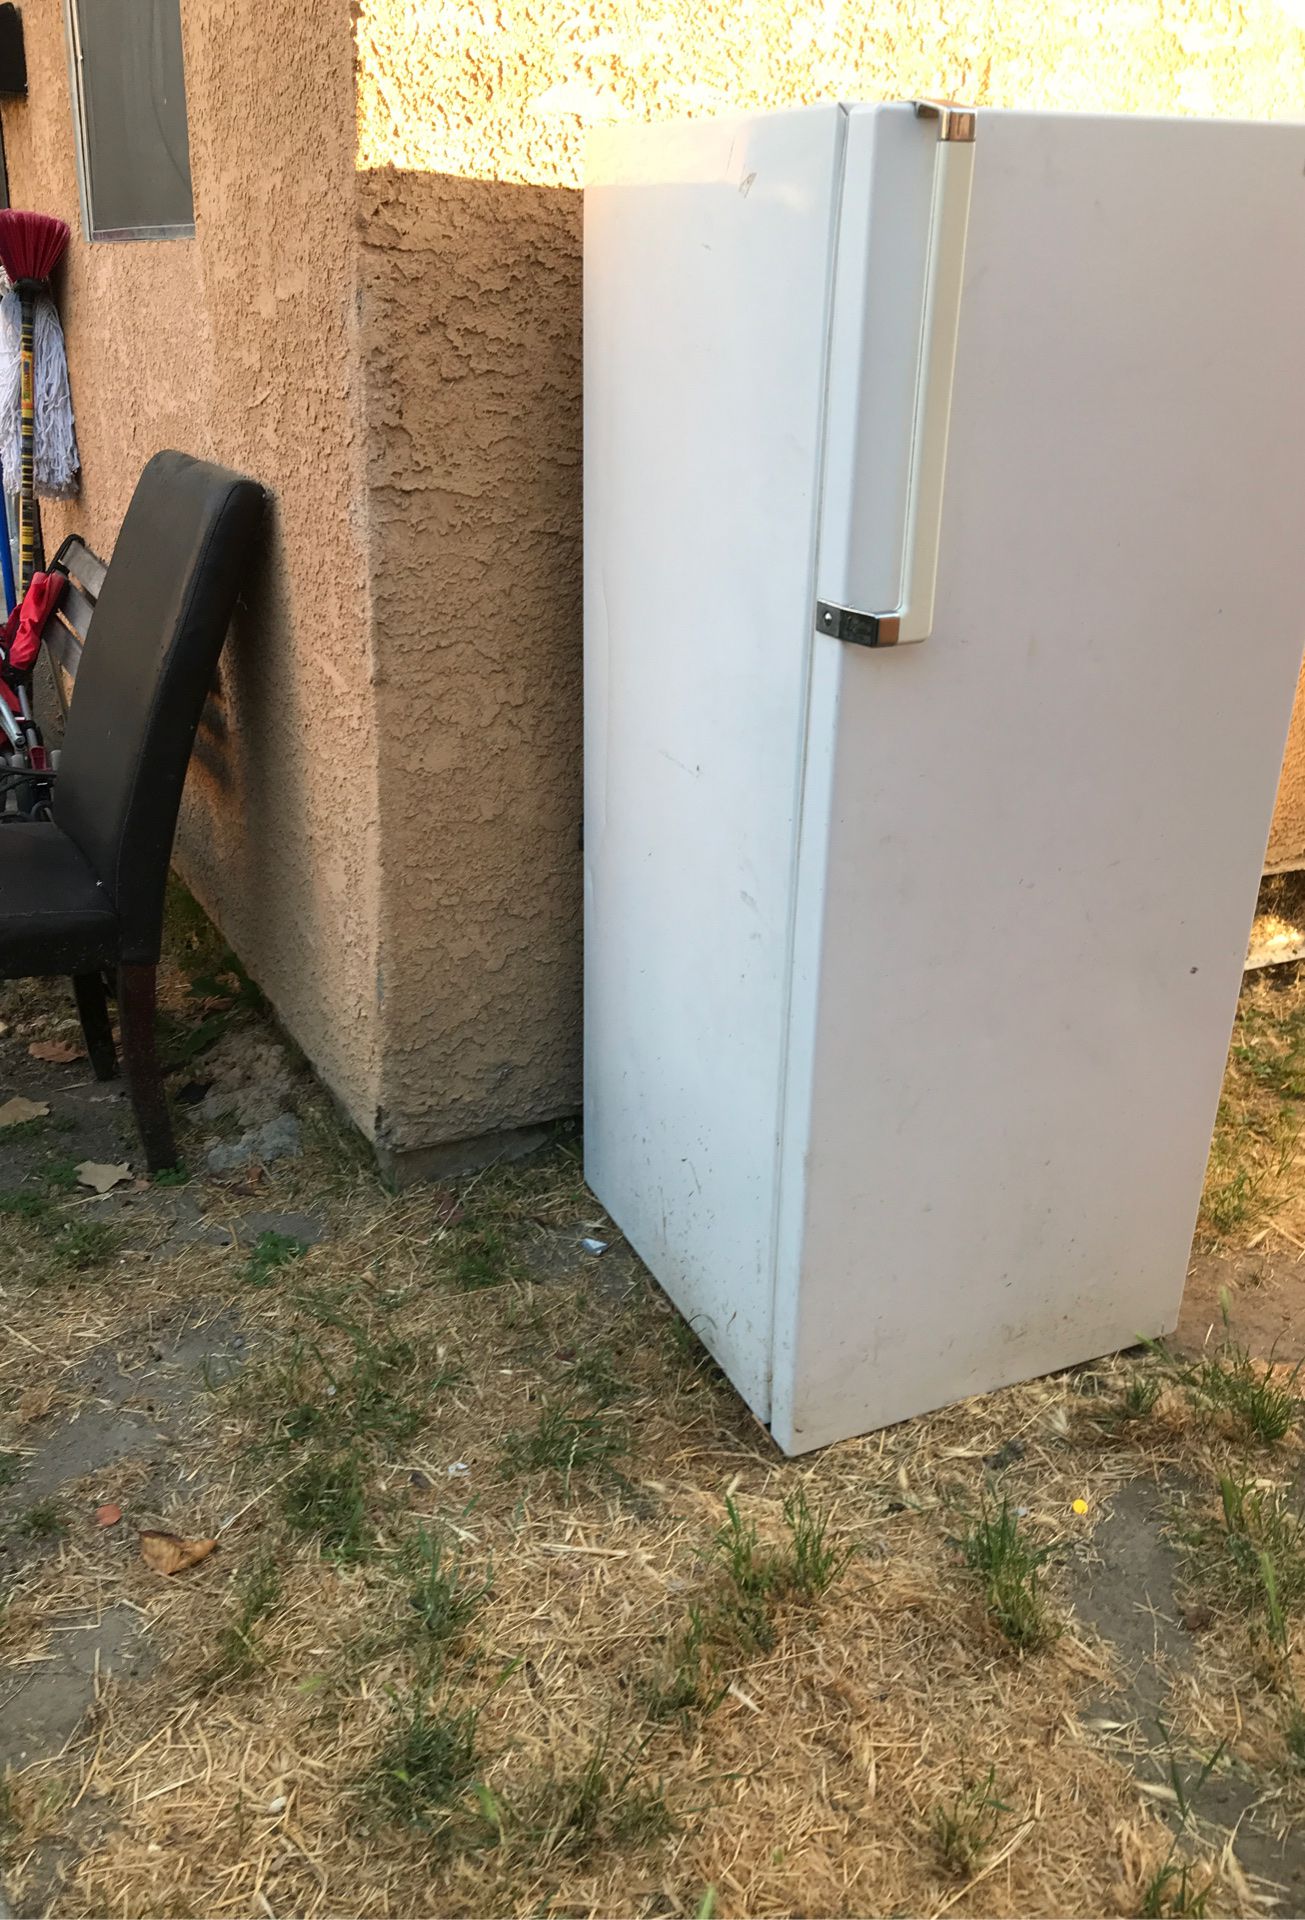 Free refrigerator (doesn’t work)